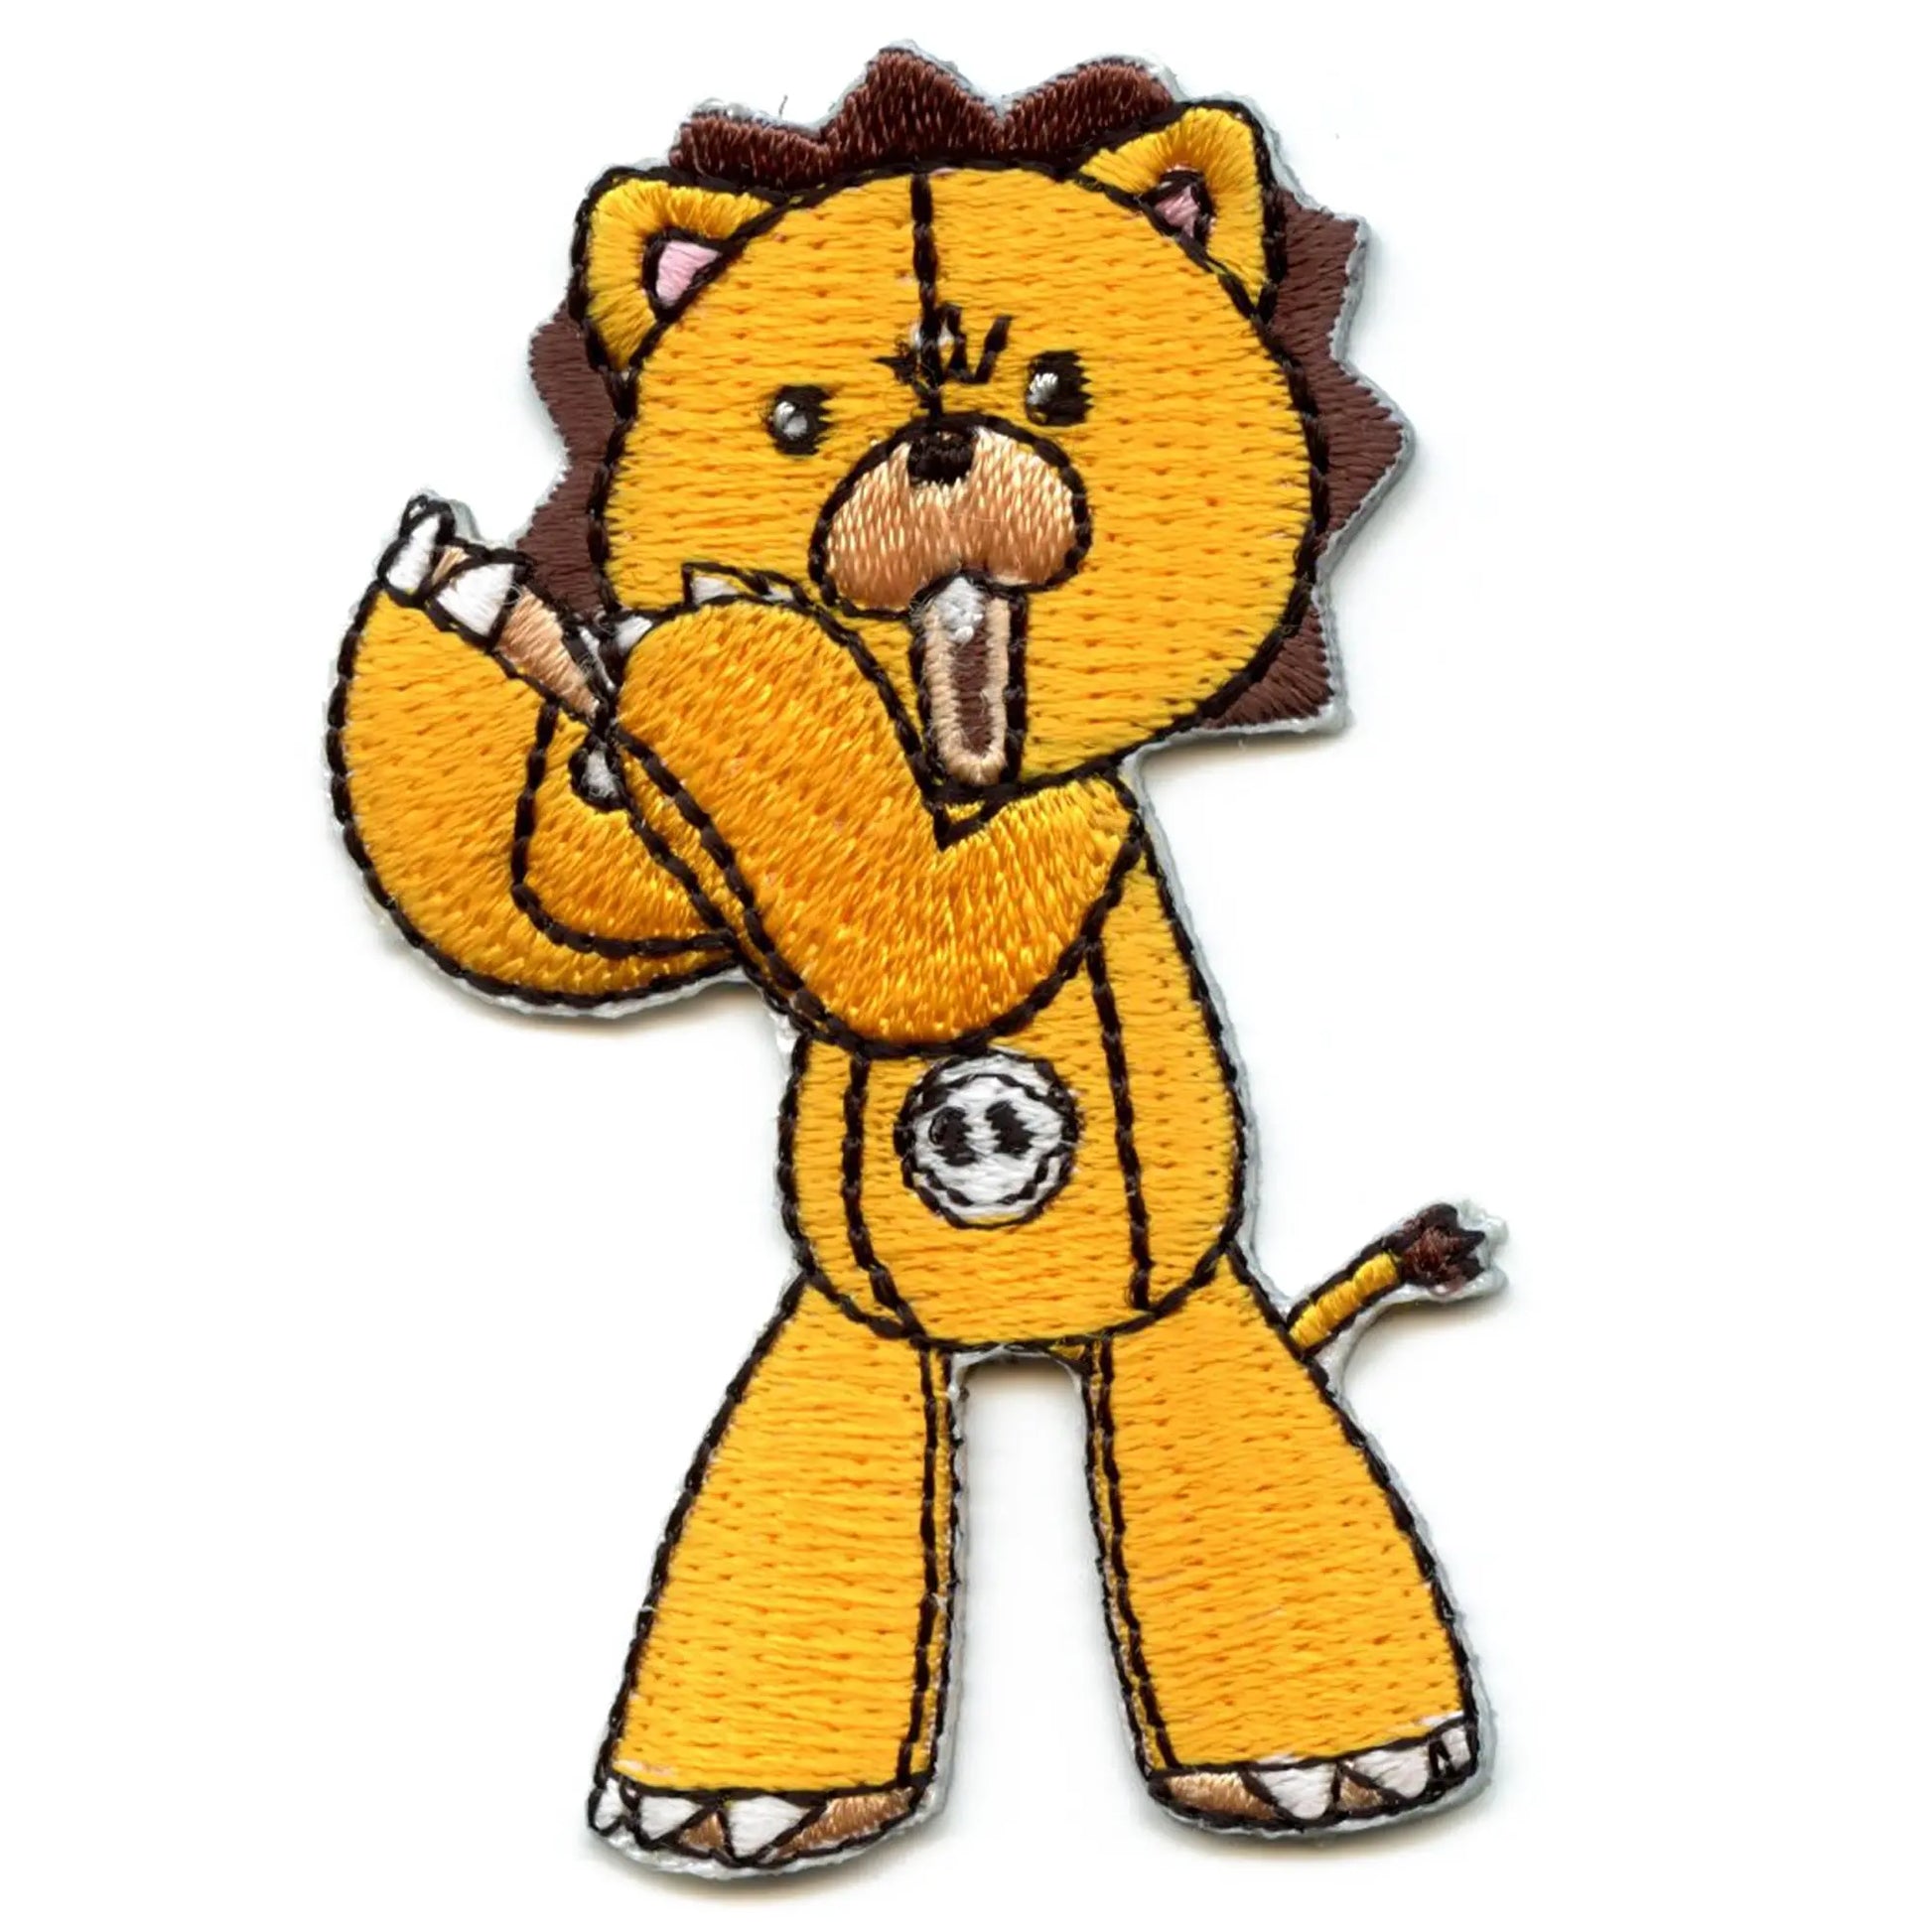 Bleach Kon Clapping Hands Patch Anime Stuffed Lion Embroidered Iron On 